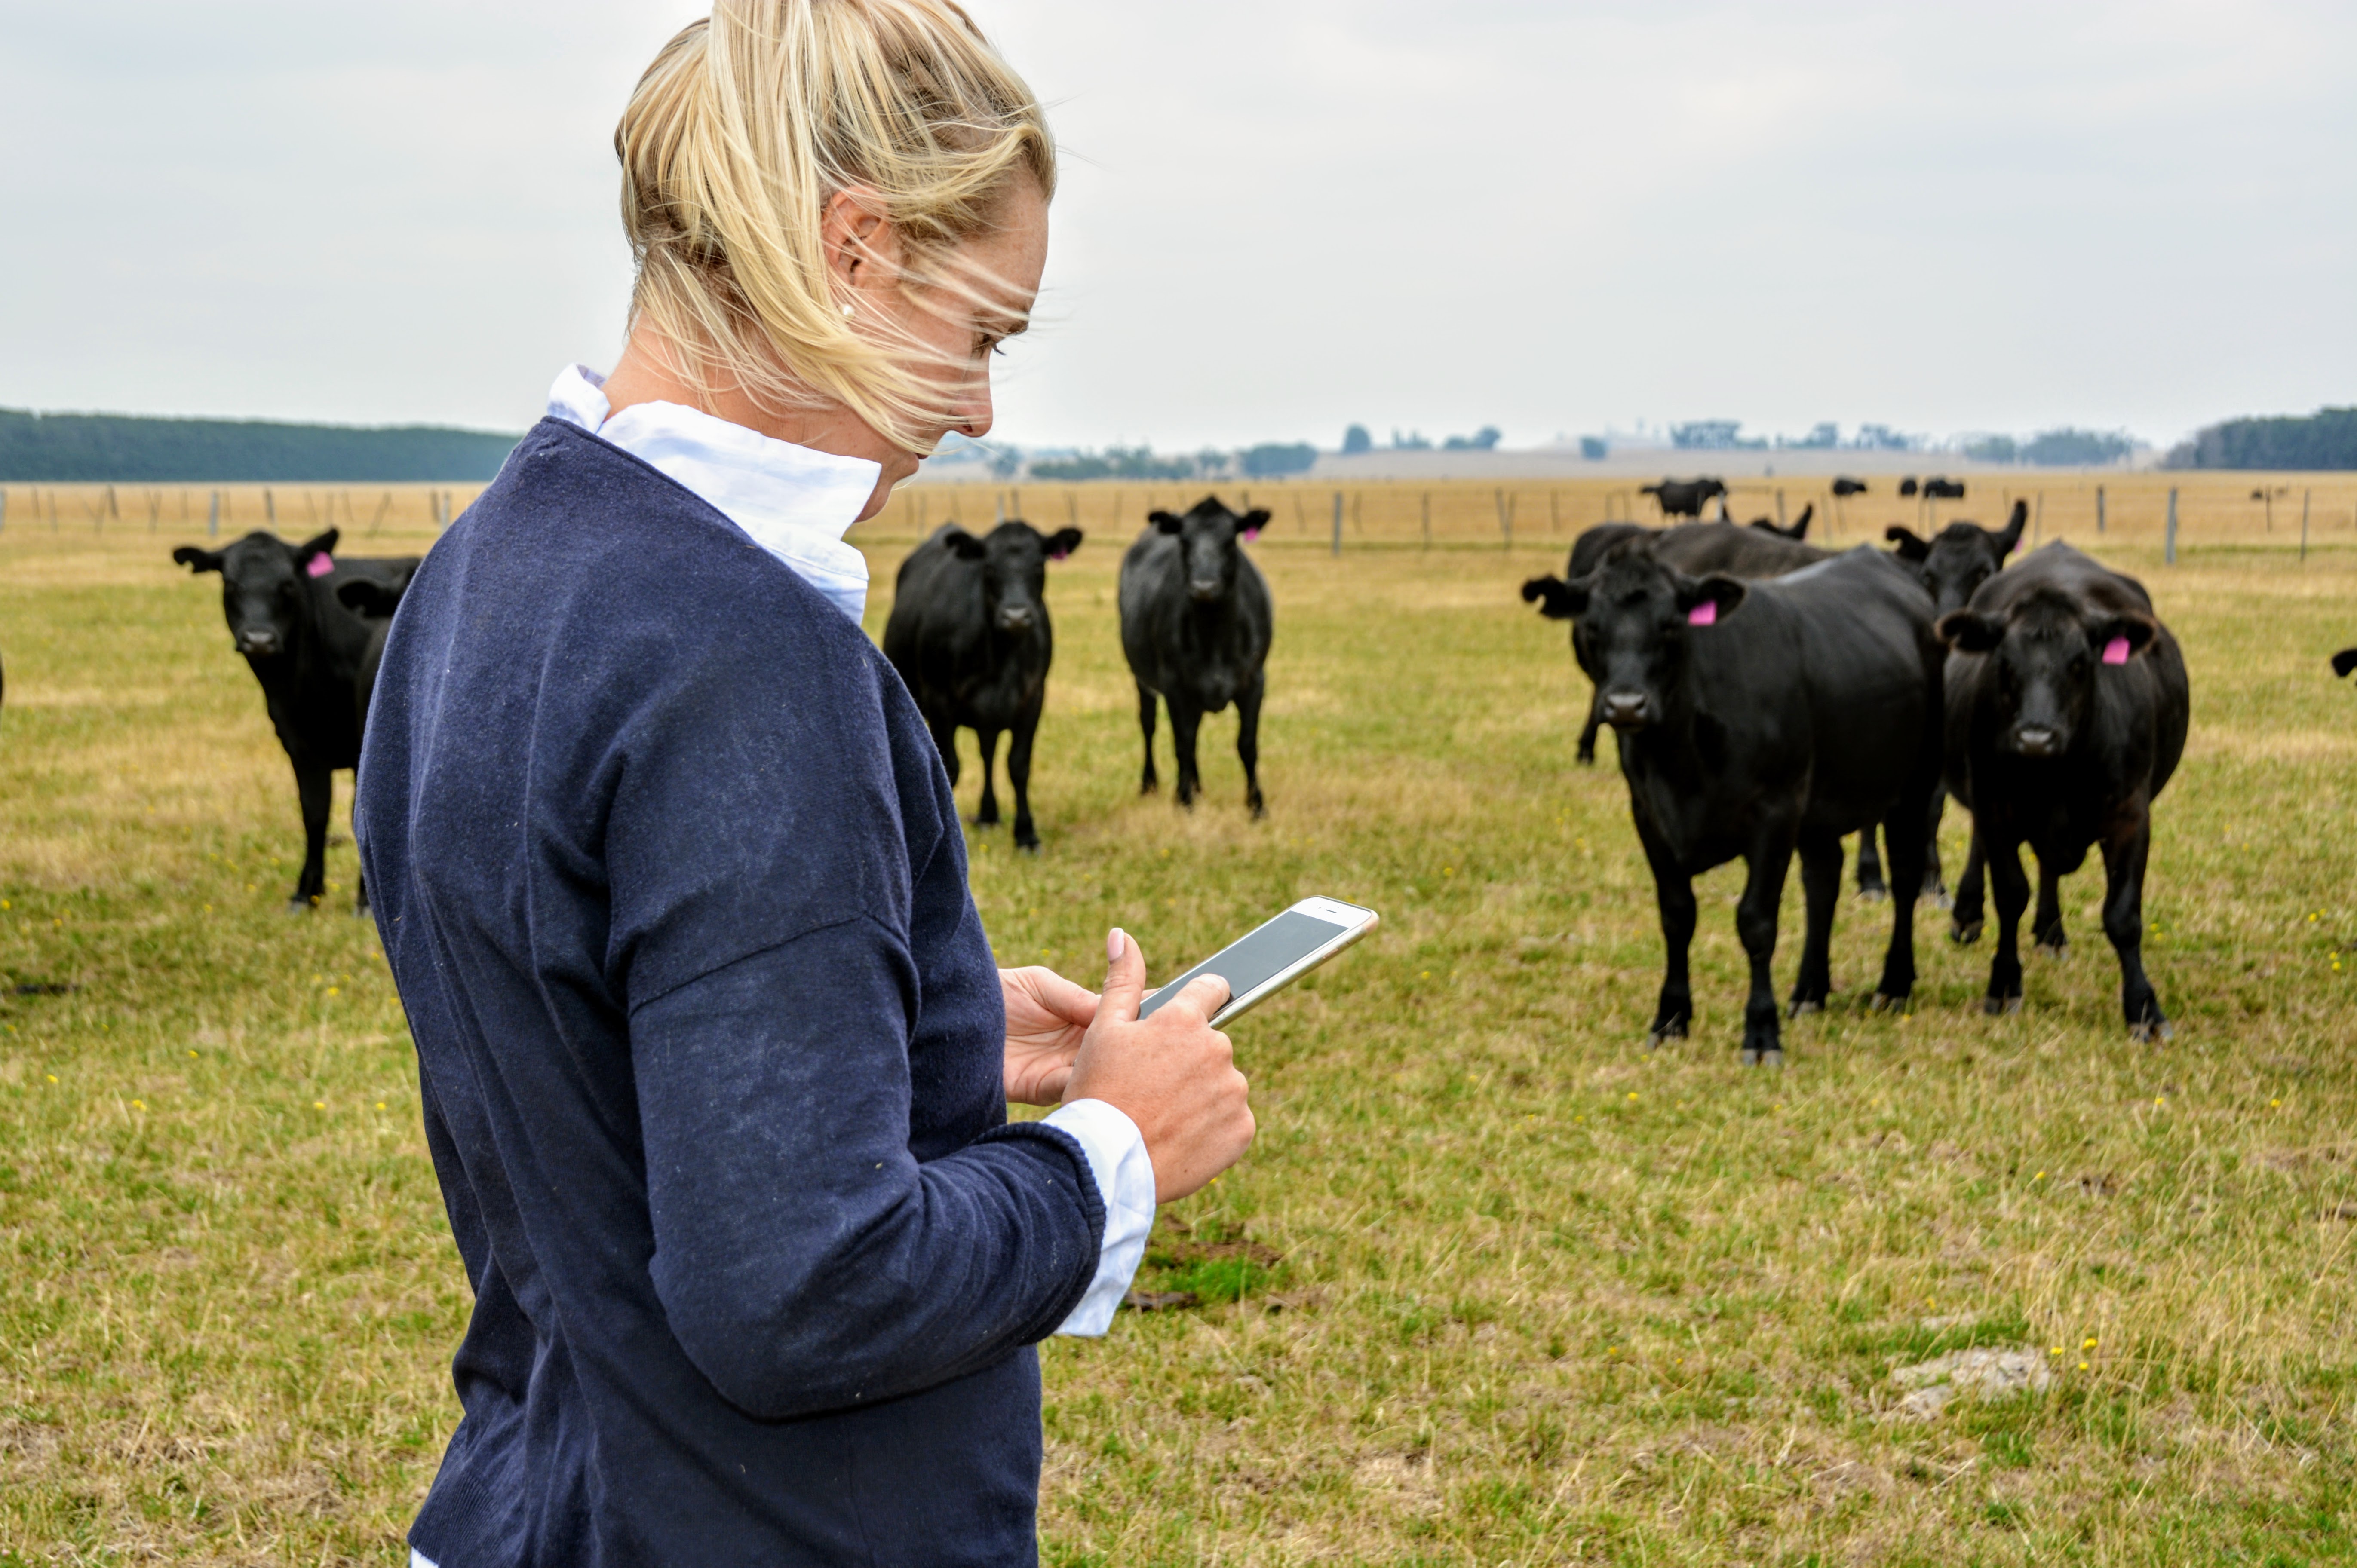 A woman looking at a phone in front of a herd of cattle